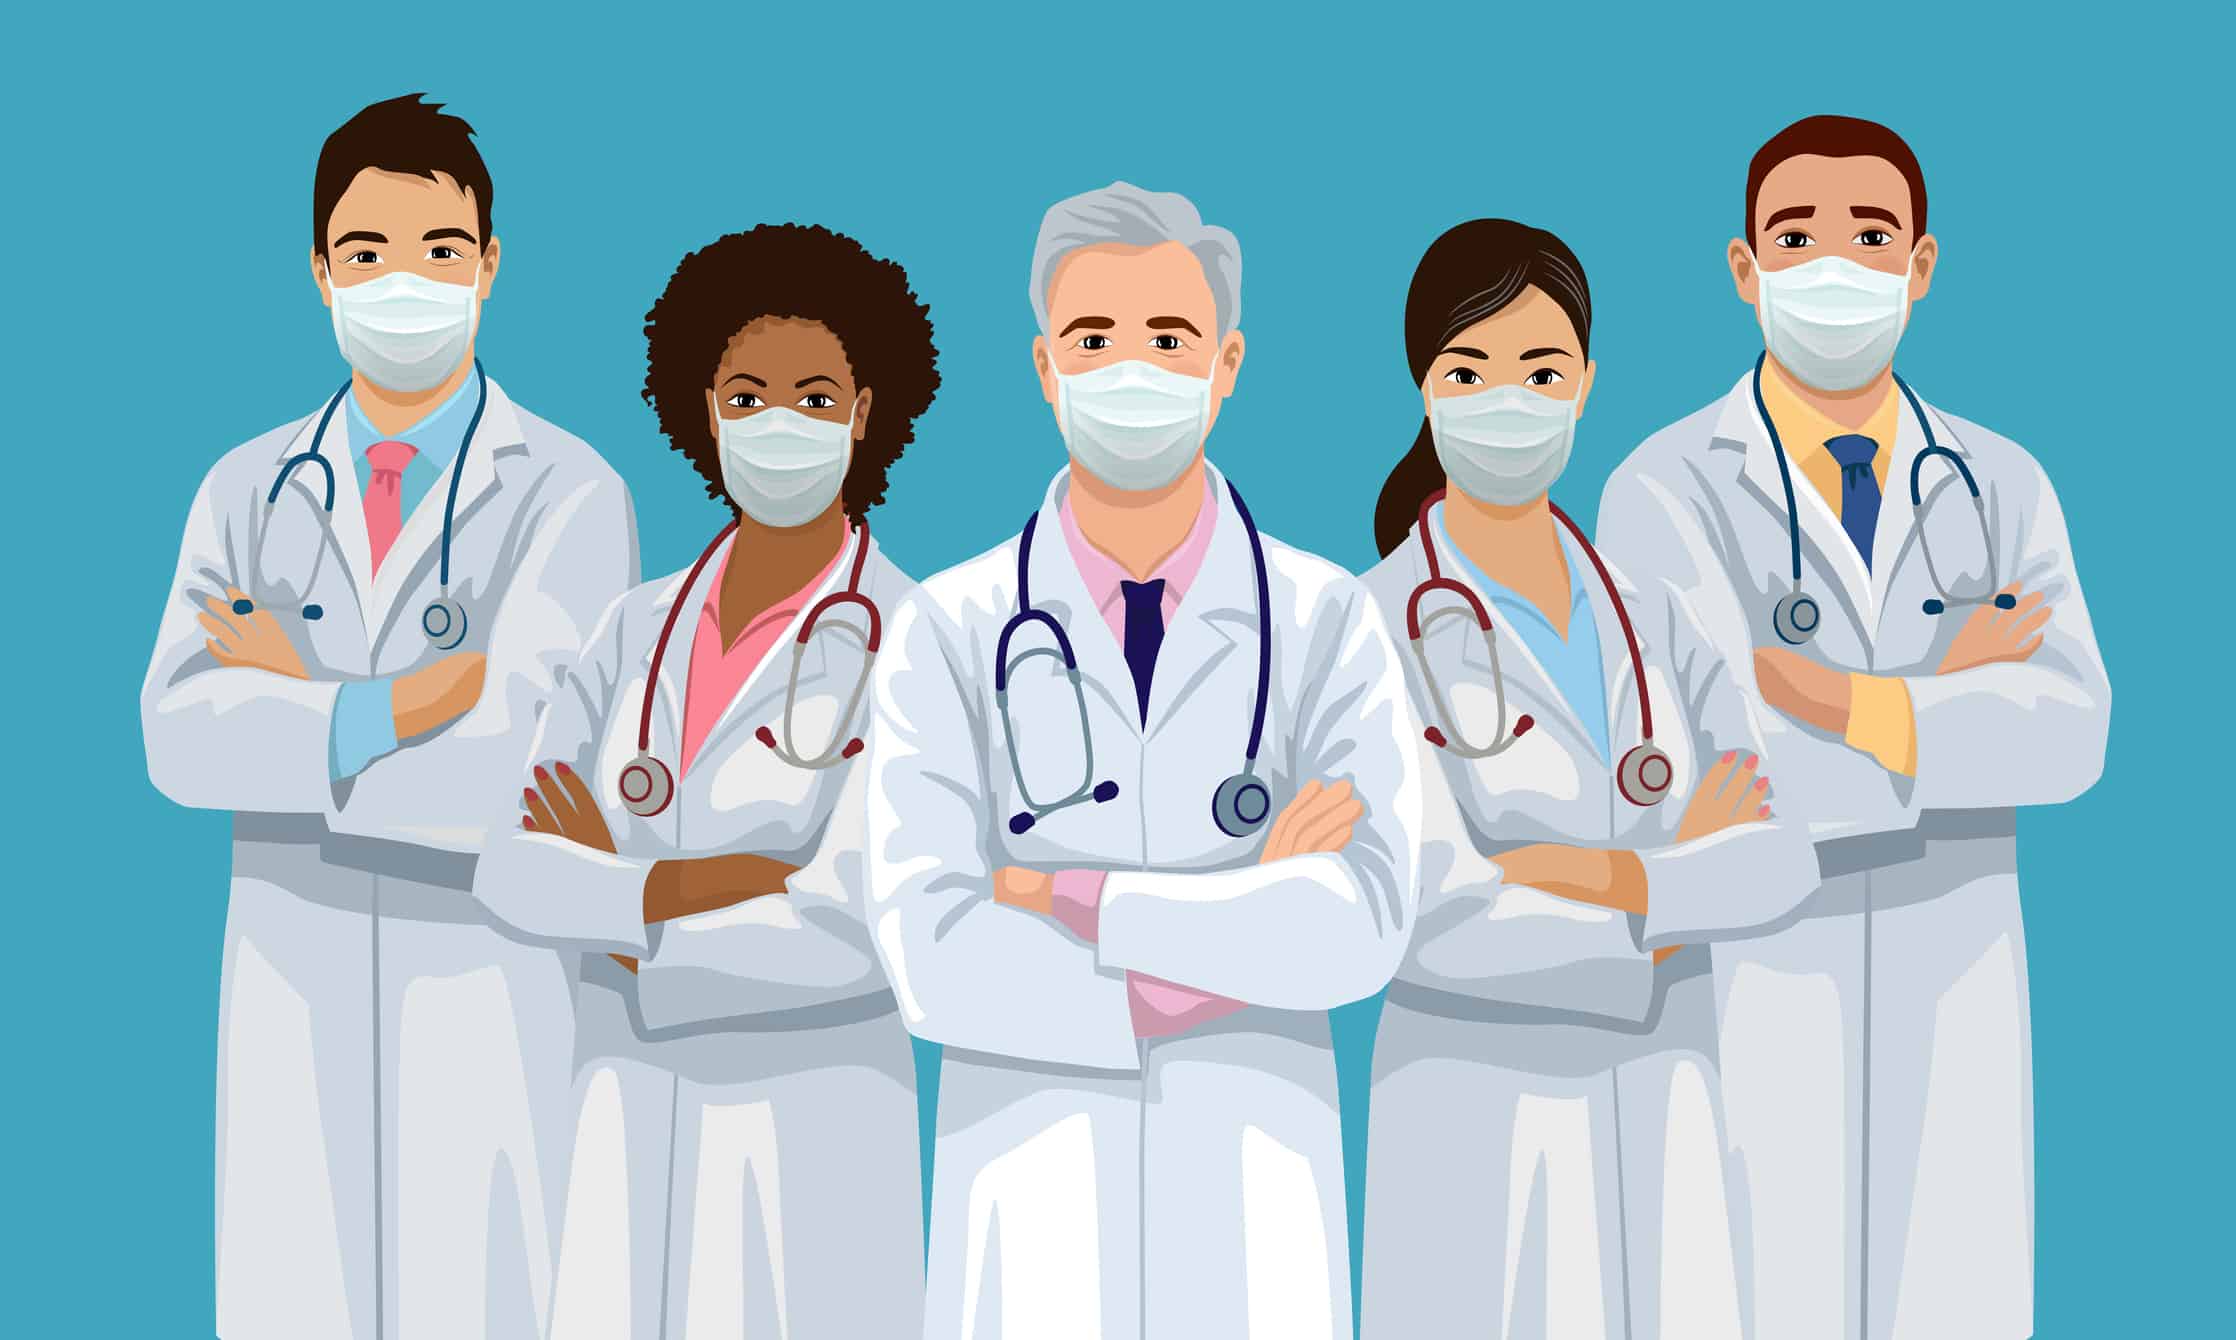 “Physician Assistant” to “Physician Associate”: What’s in a Name?